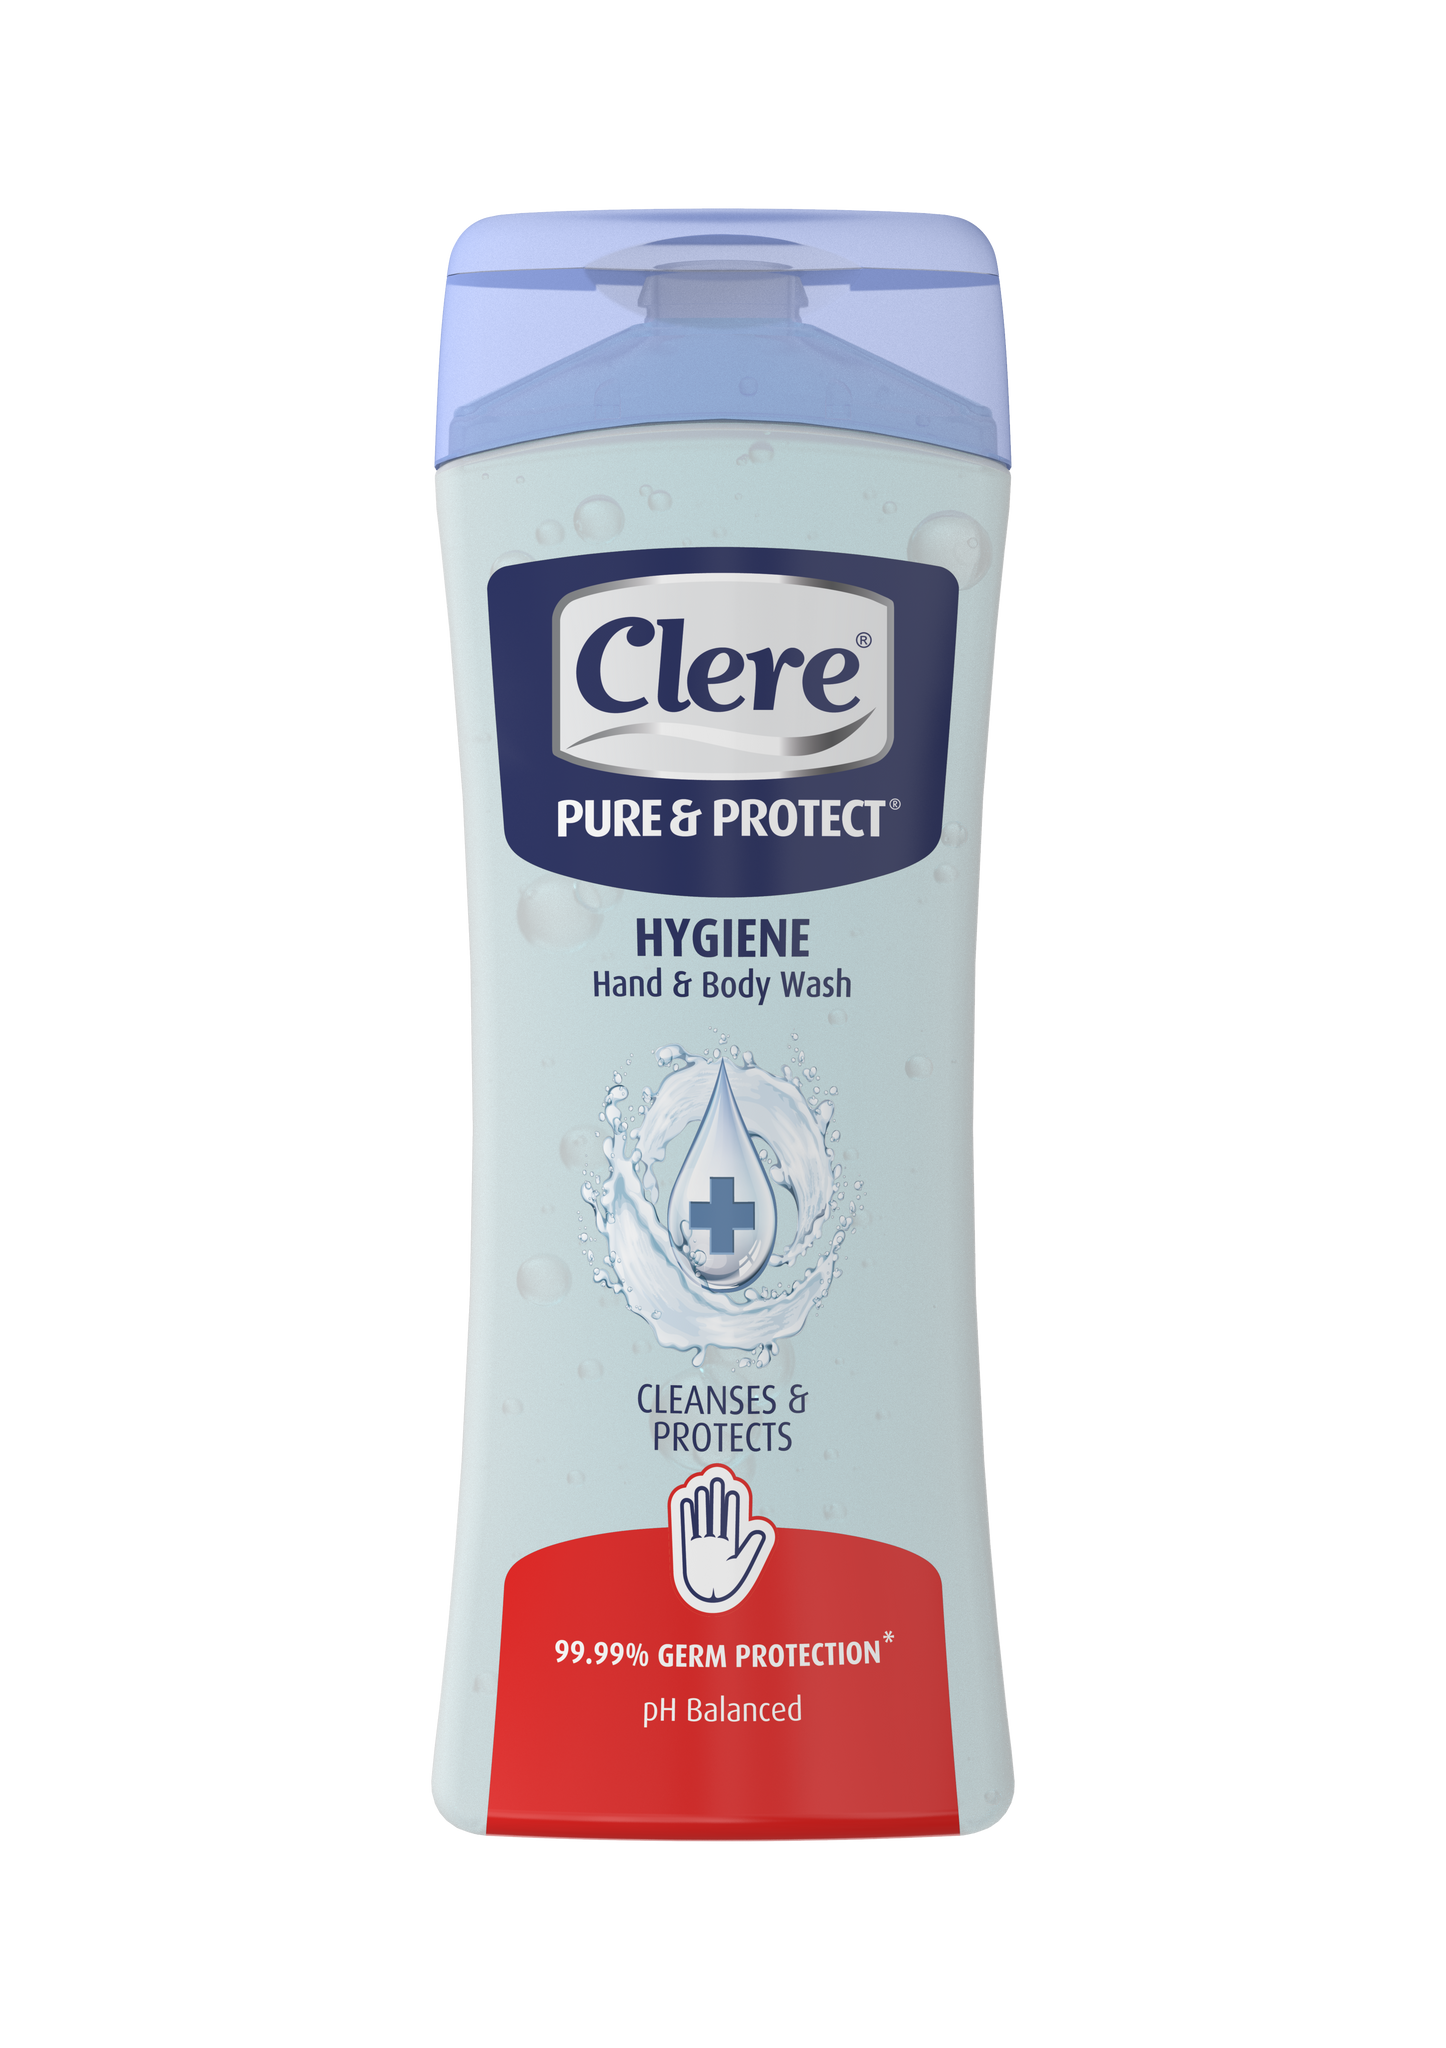 Clere Pure & Protect Hygiene Hand & Body Wash (lotion bottle) - 200ml